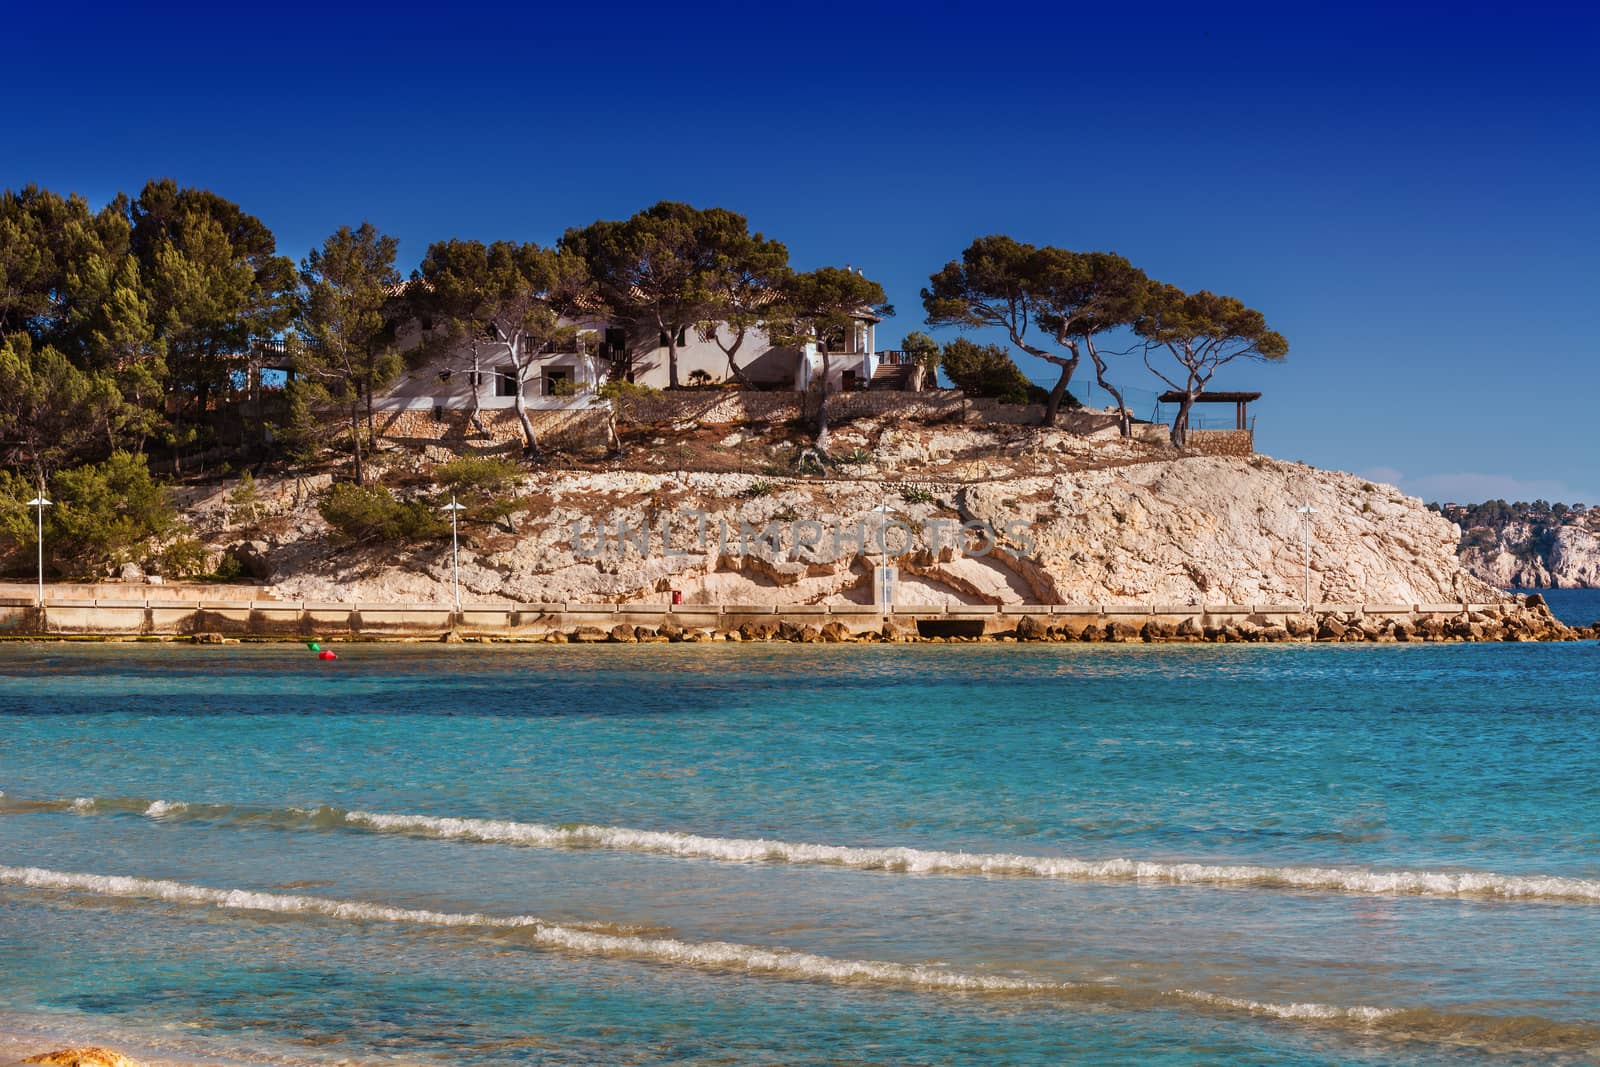 Views of the Bay of Paguera with a sandy beach and azure waters, Mallorca, Spain.